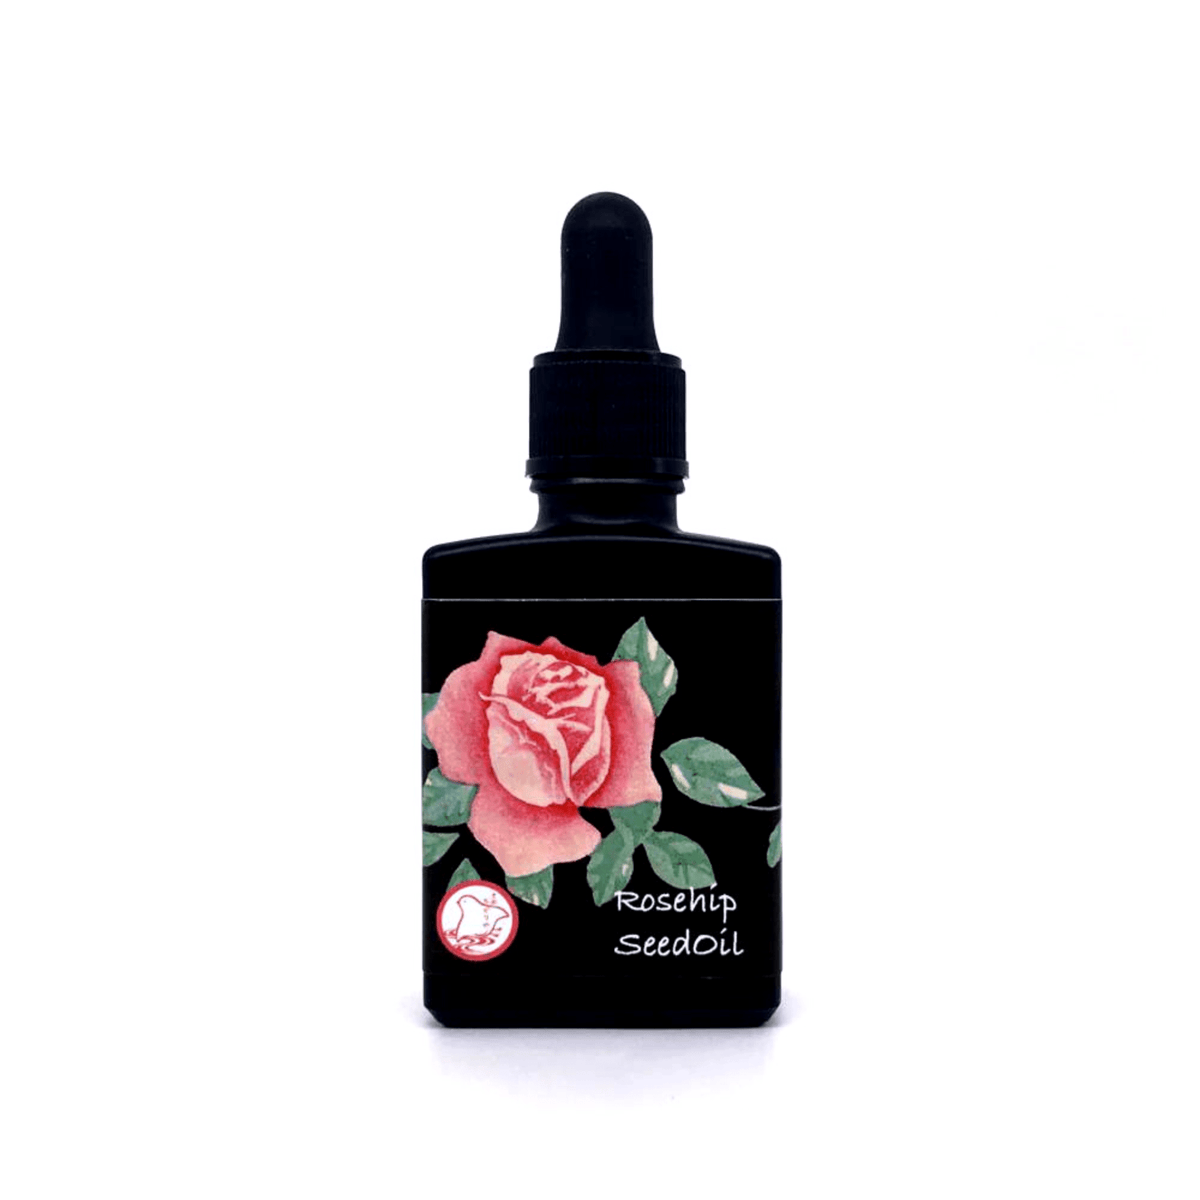 Primary Image of Organic Rosehip Seed Oil With Dropper